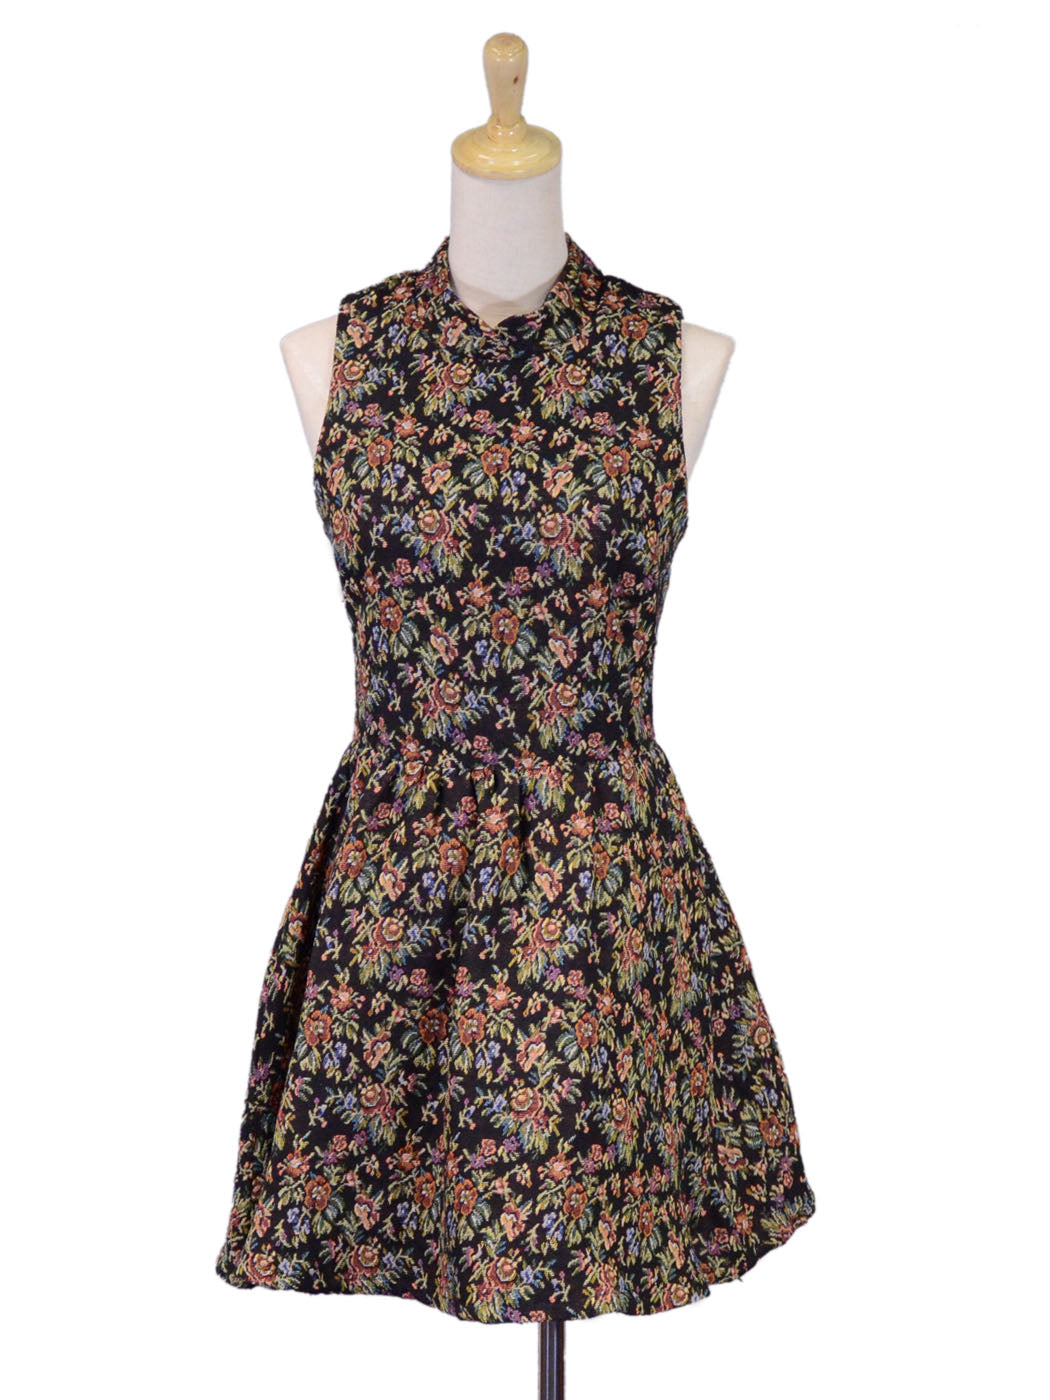 Double Zero High Neckline All Over Floral Printed Embroidered Bell Skirt Dress - ALILANG.COM